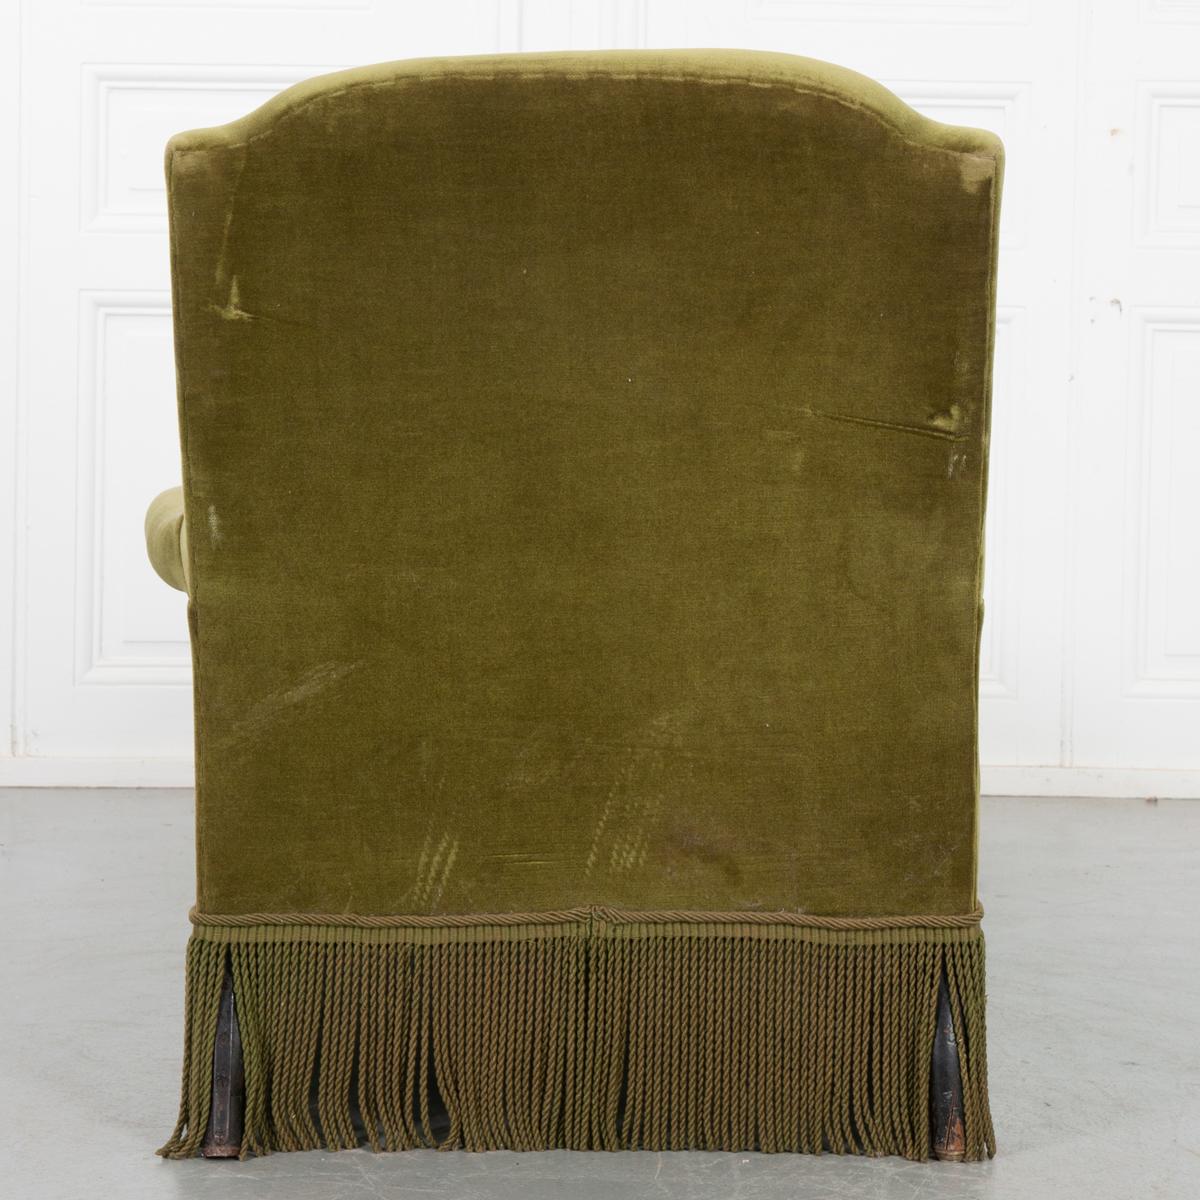 This green fringed chaise lounger is absolutely stunning. The color and texture of the worn upholstery add a touch of vintage sophistication to any living space. Fringe along the whole of the bottom hides the turned wooden feet and give it a look of